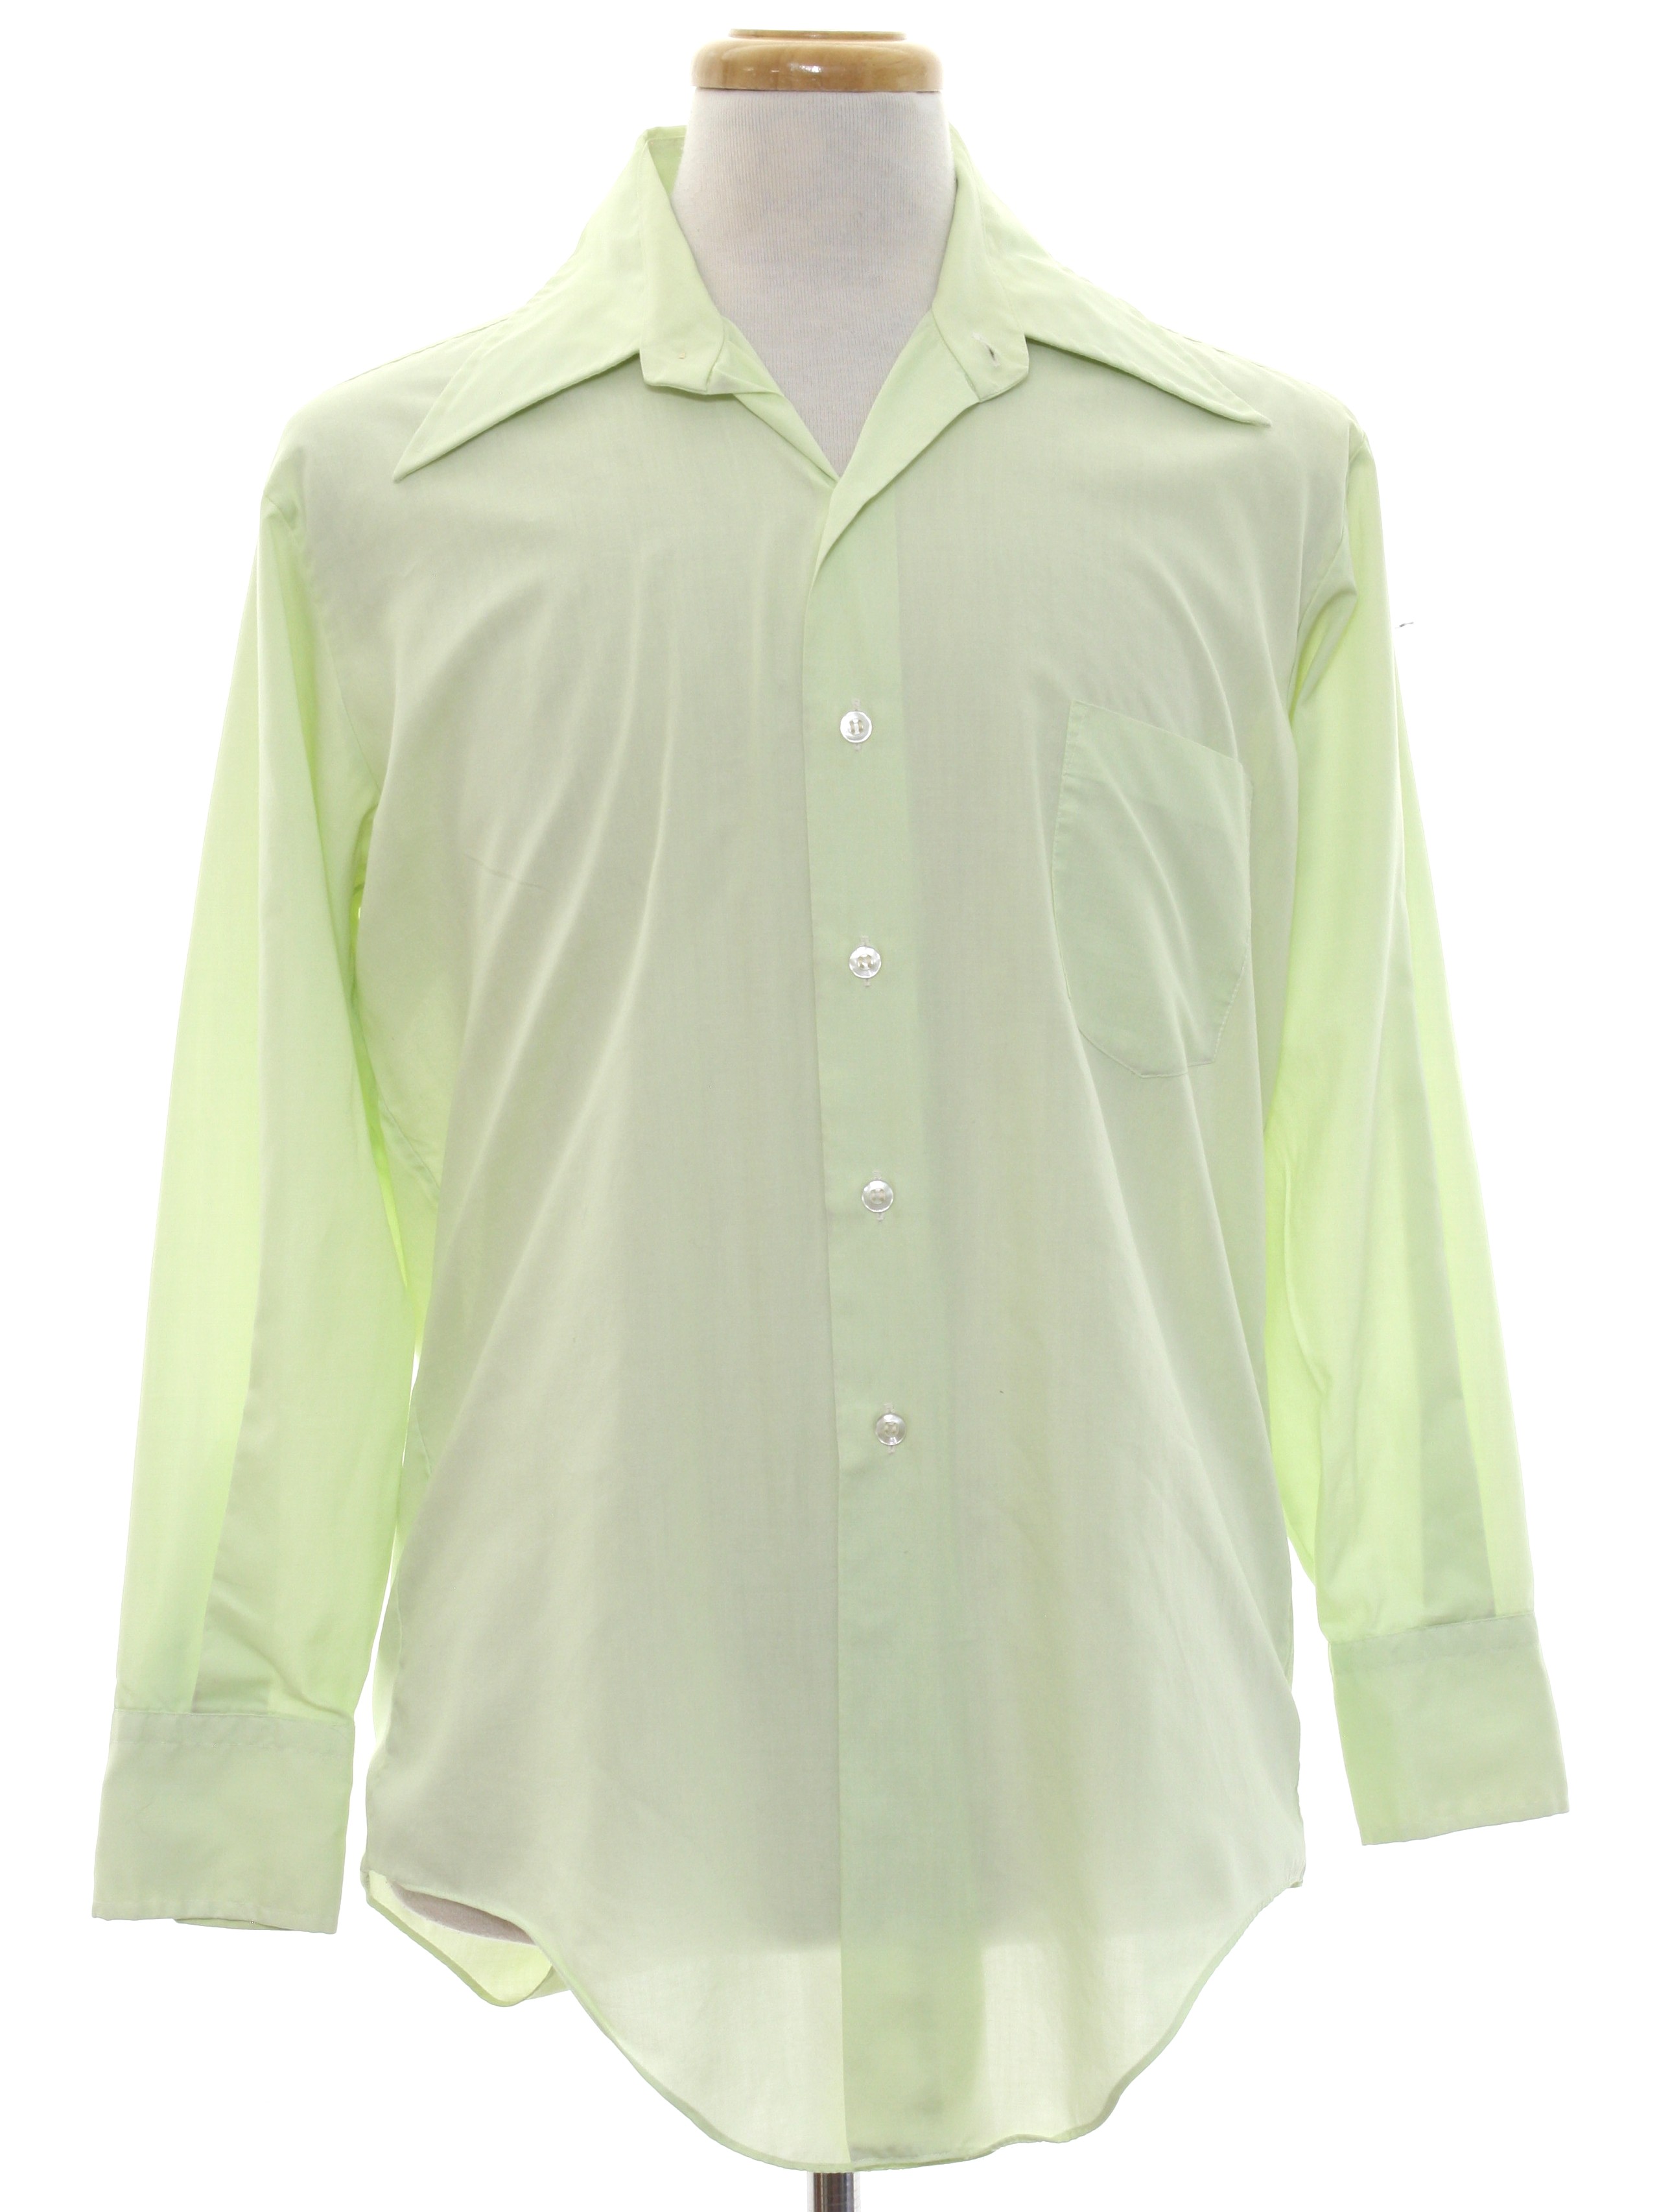 60s Retro Shirt: Late 60s or early 70s -Towncraft- Mens light lime ...